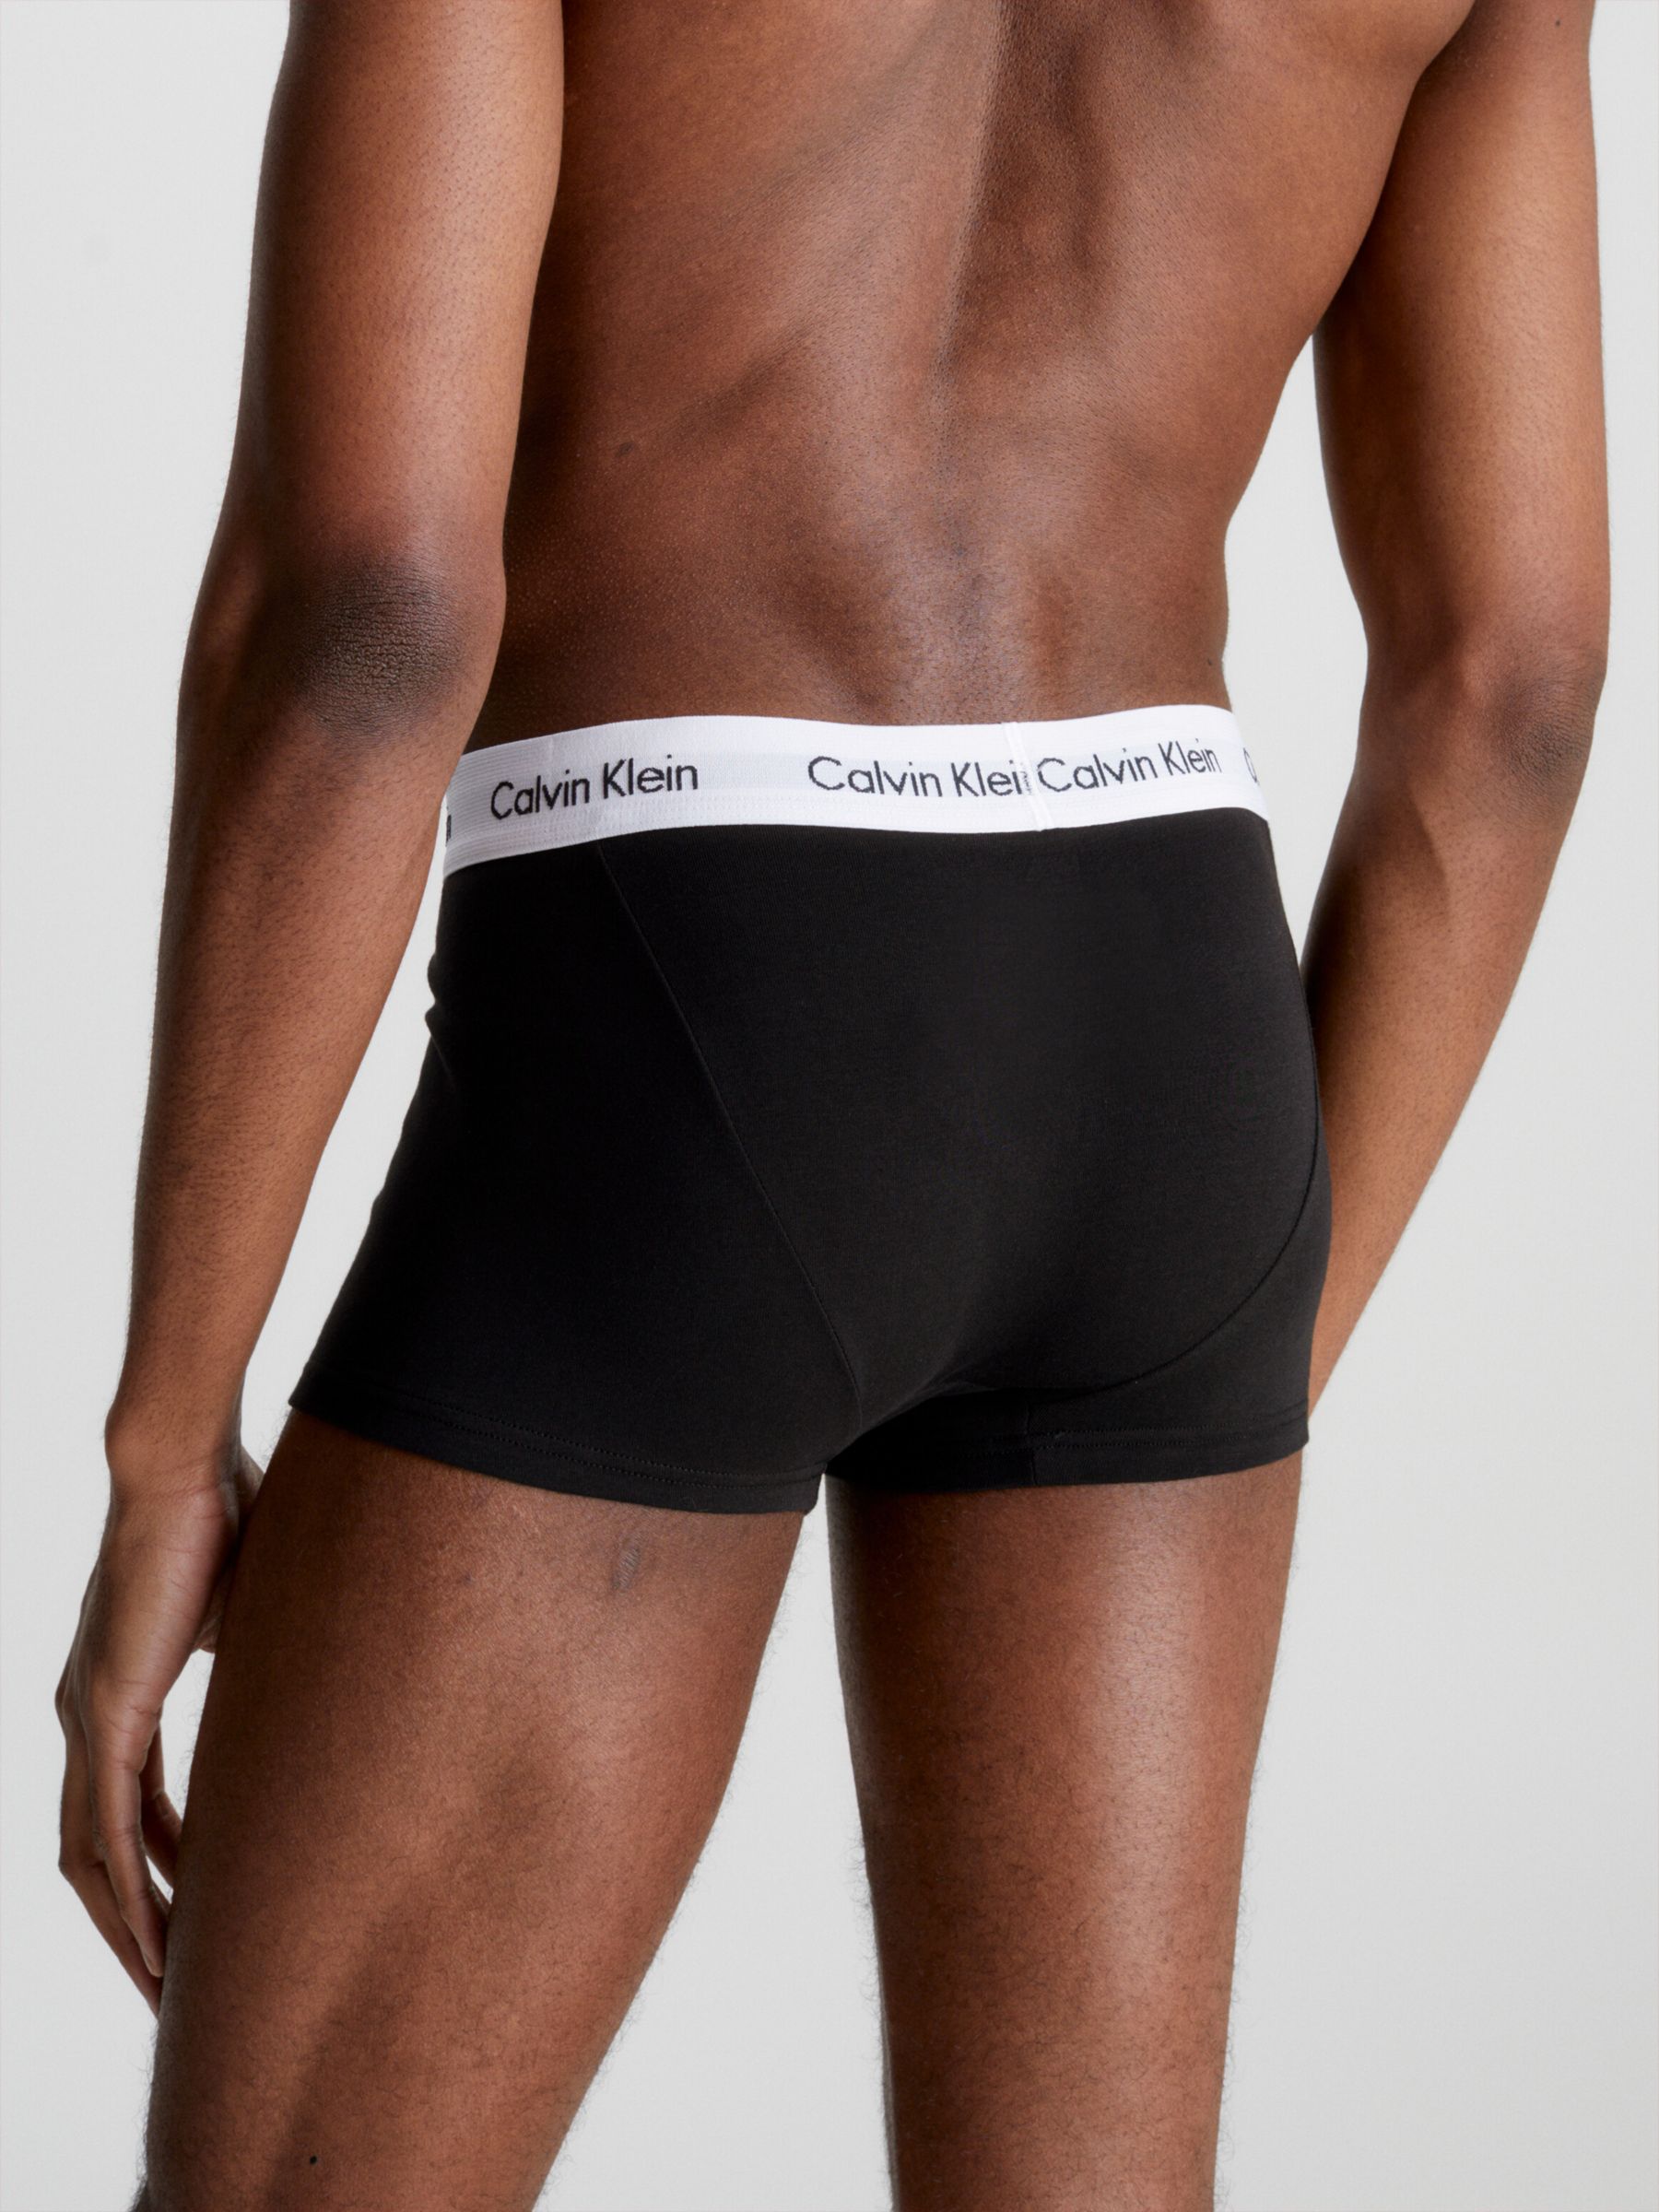 Calvin Klein Low Rise Stretch Trunks, Pack 3, Black at John Lewis & Partners